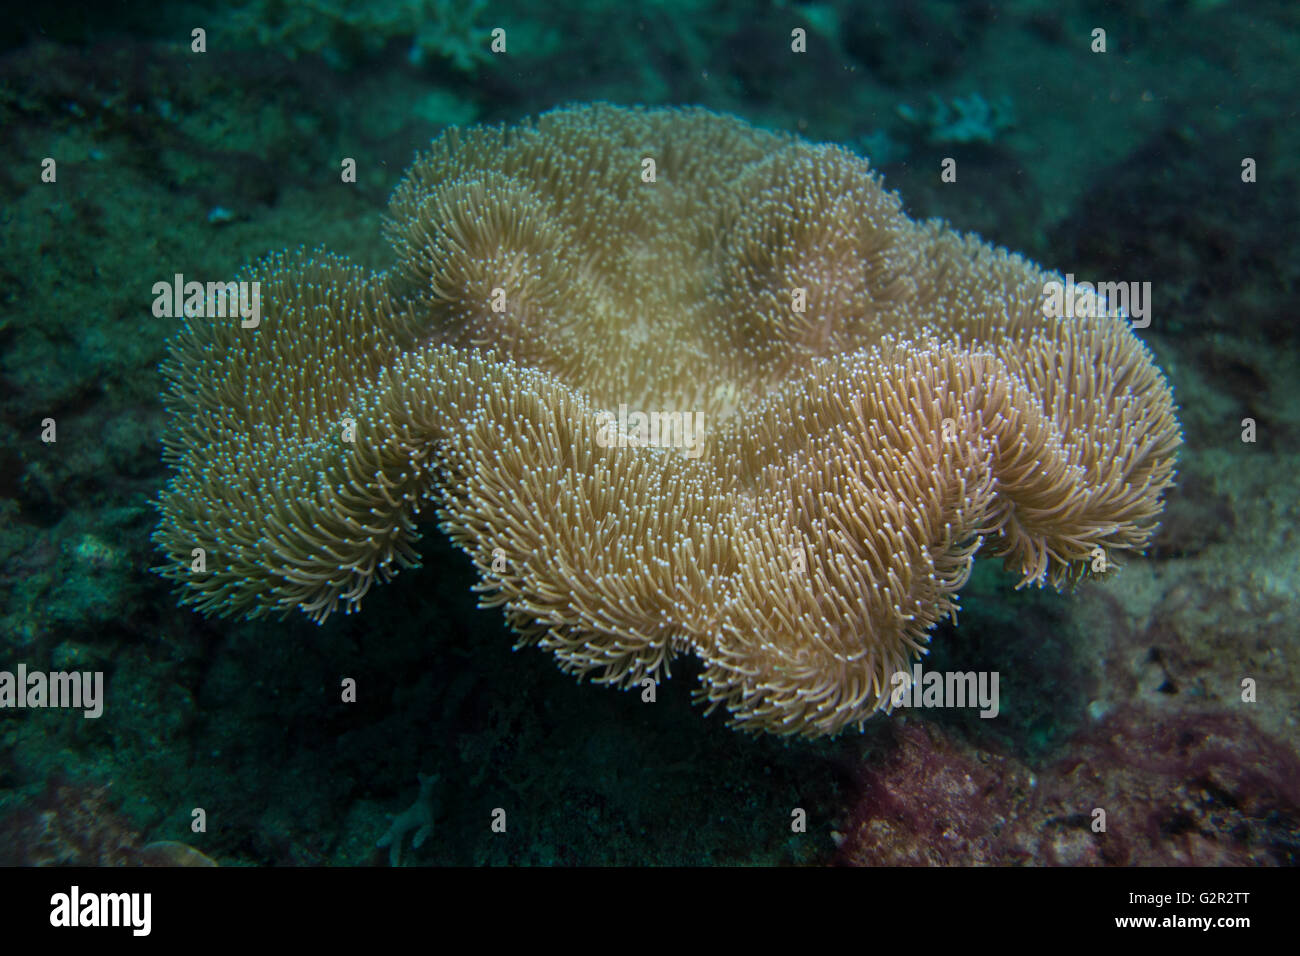 Leather coral, Sarcophyton sp., from the Coral Triangle, Brunei Darussalam, South China Sea. Stock Photo